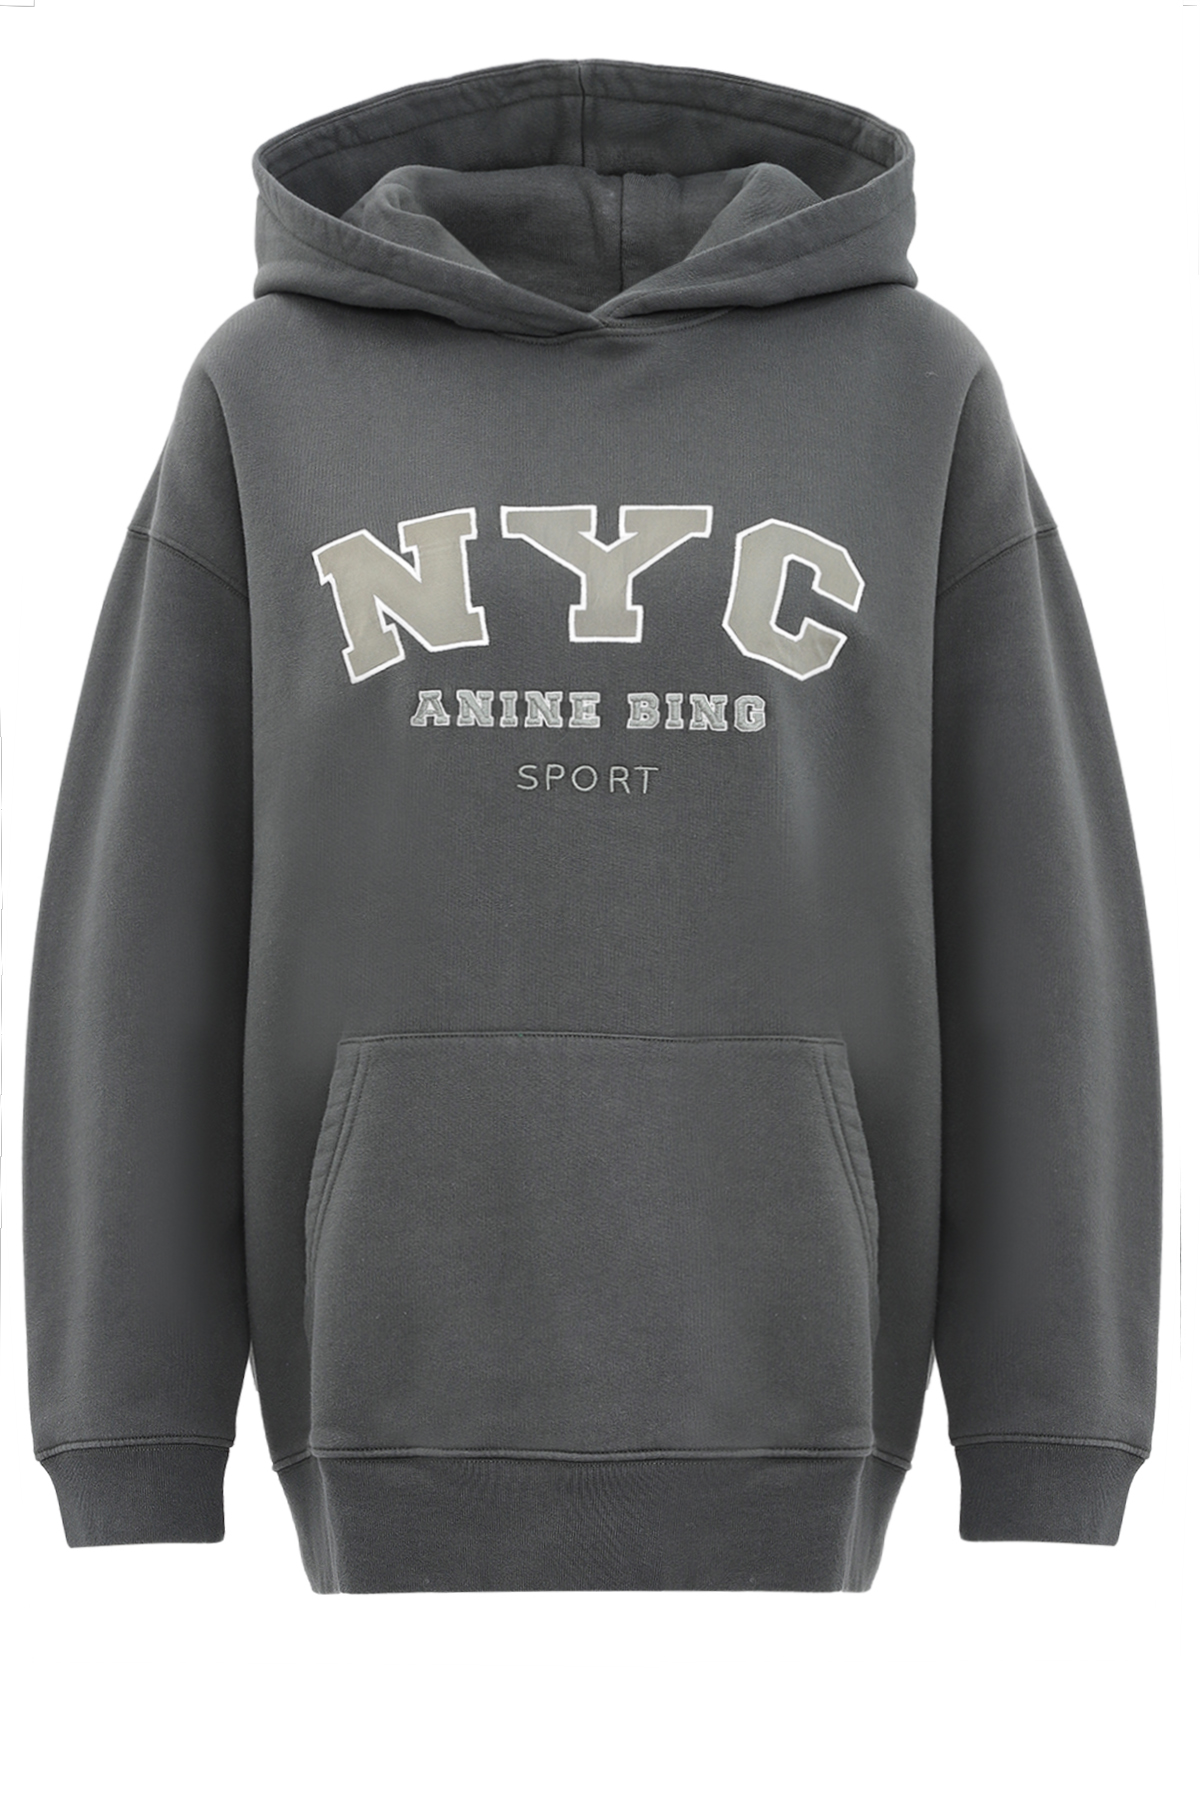 Cotton Hoodie Vincent NYC